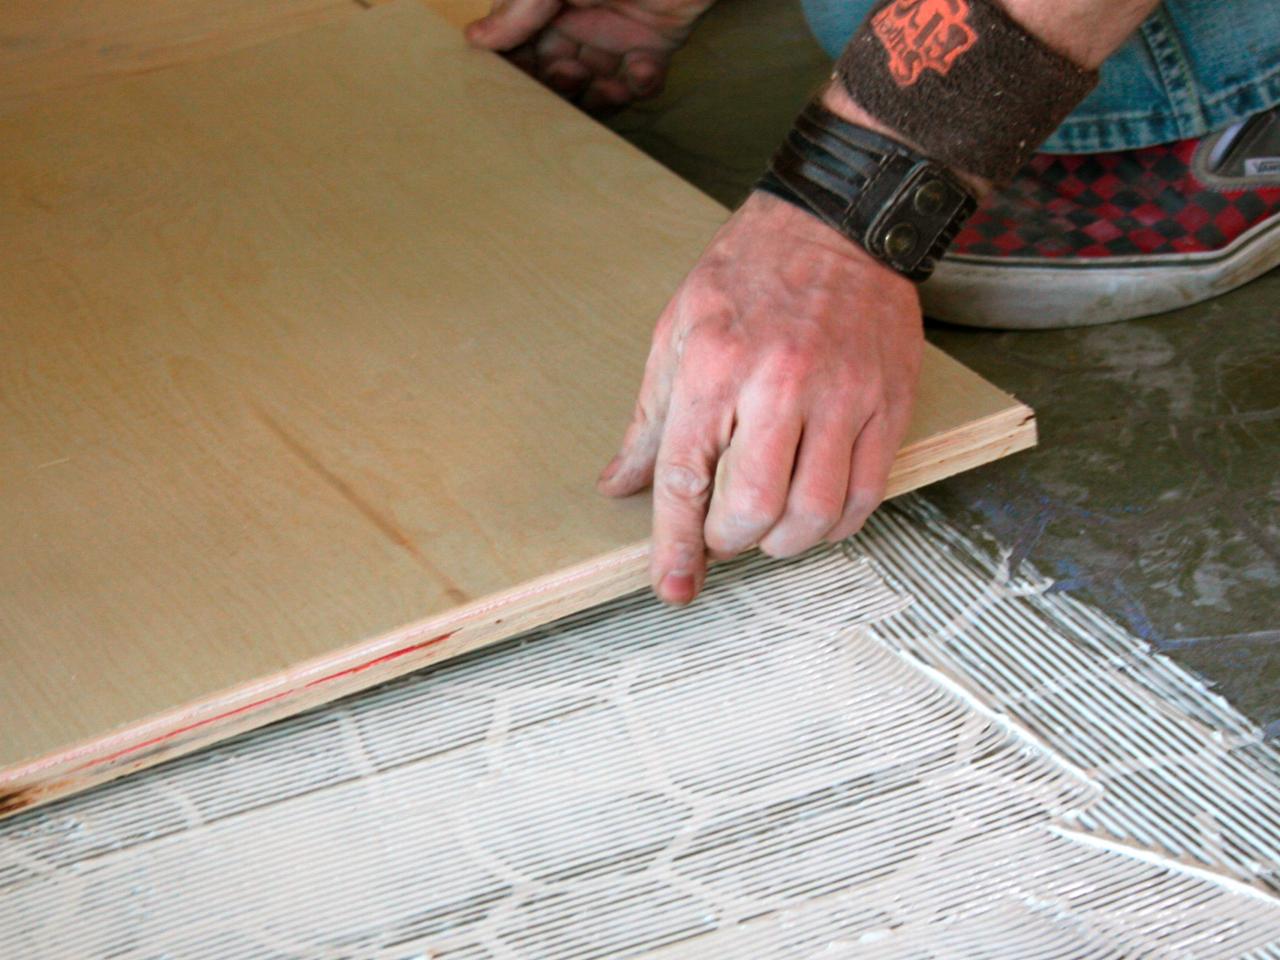 How To Install Plywood Floor Tiles, Best Flooring To Put Over Ceramic Tile